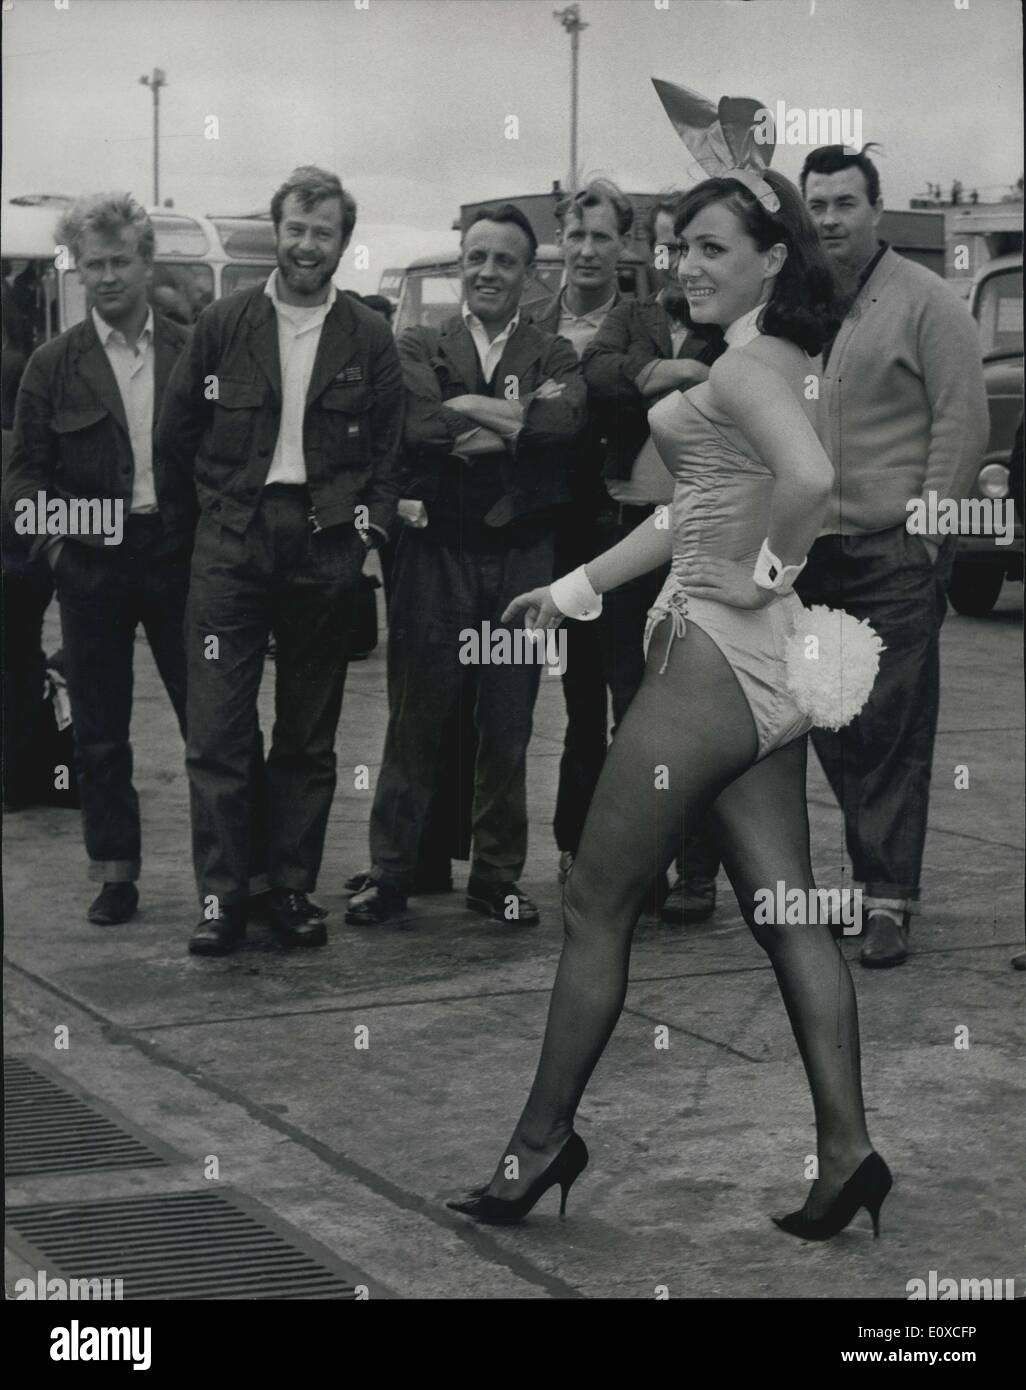 Jun. 06, 1966 - First Continental Bunny for London Playboy Club Arrives From Hamburg: Helga Schramm, a 24 year old from Hamburg, arrived at London Airport today, to begin training as a Playboy Bunny at the London Playboy Club. The London Playboy Club located at 45 Park Lane, will open officially on June 30th. Before becoming a Playboy Bunny, Helga (measurement 34''x25''x35'') worked in Hamburg and English, French and German. At the London Playboy Club, Helga will join 85 British Bunnies at the Bunny Training School Stock Photo